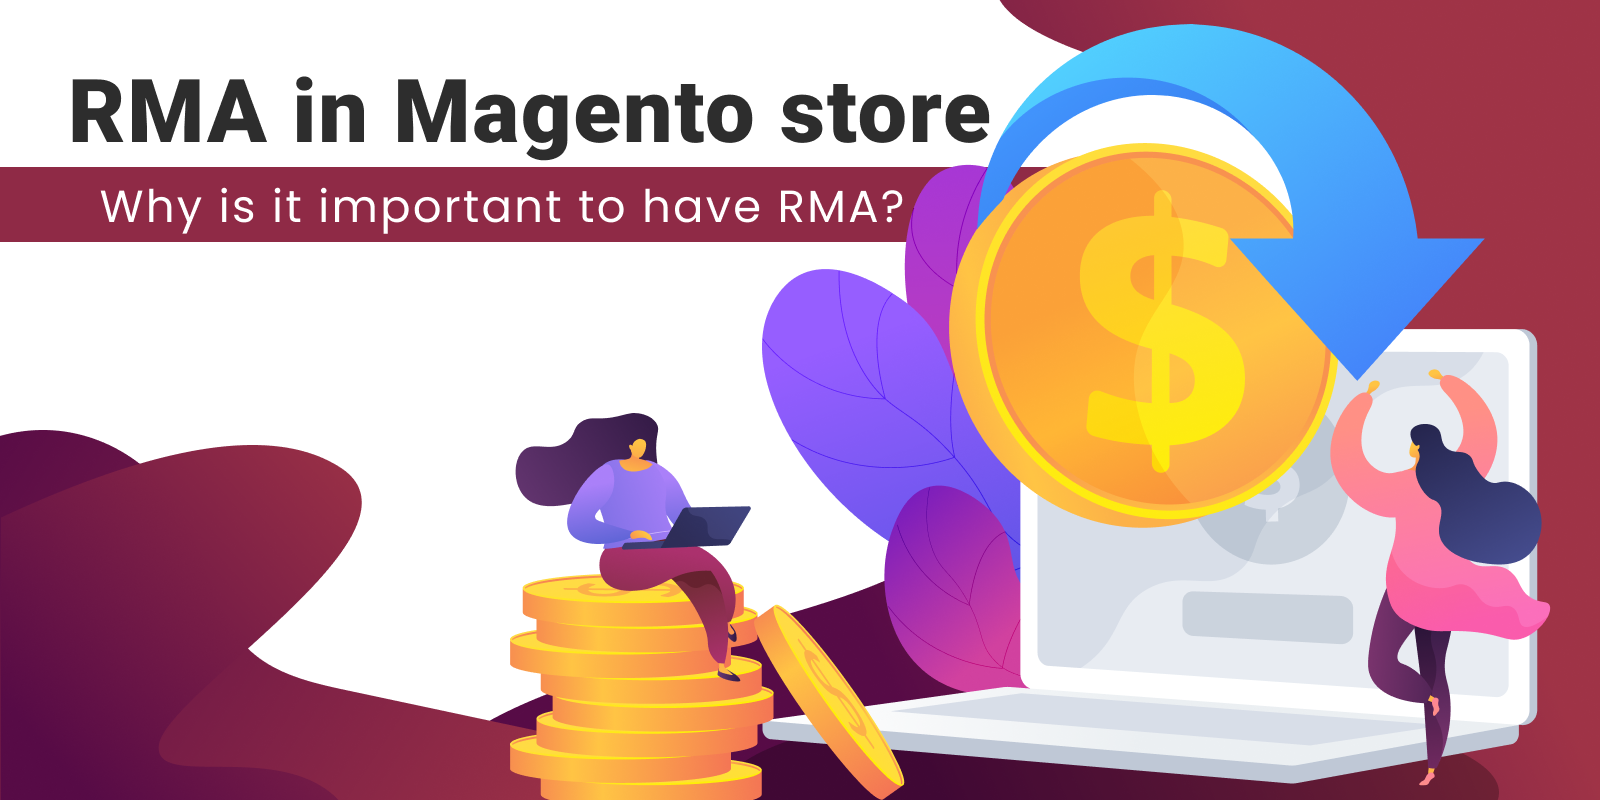 Why is it important to have an RMA in Magento store